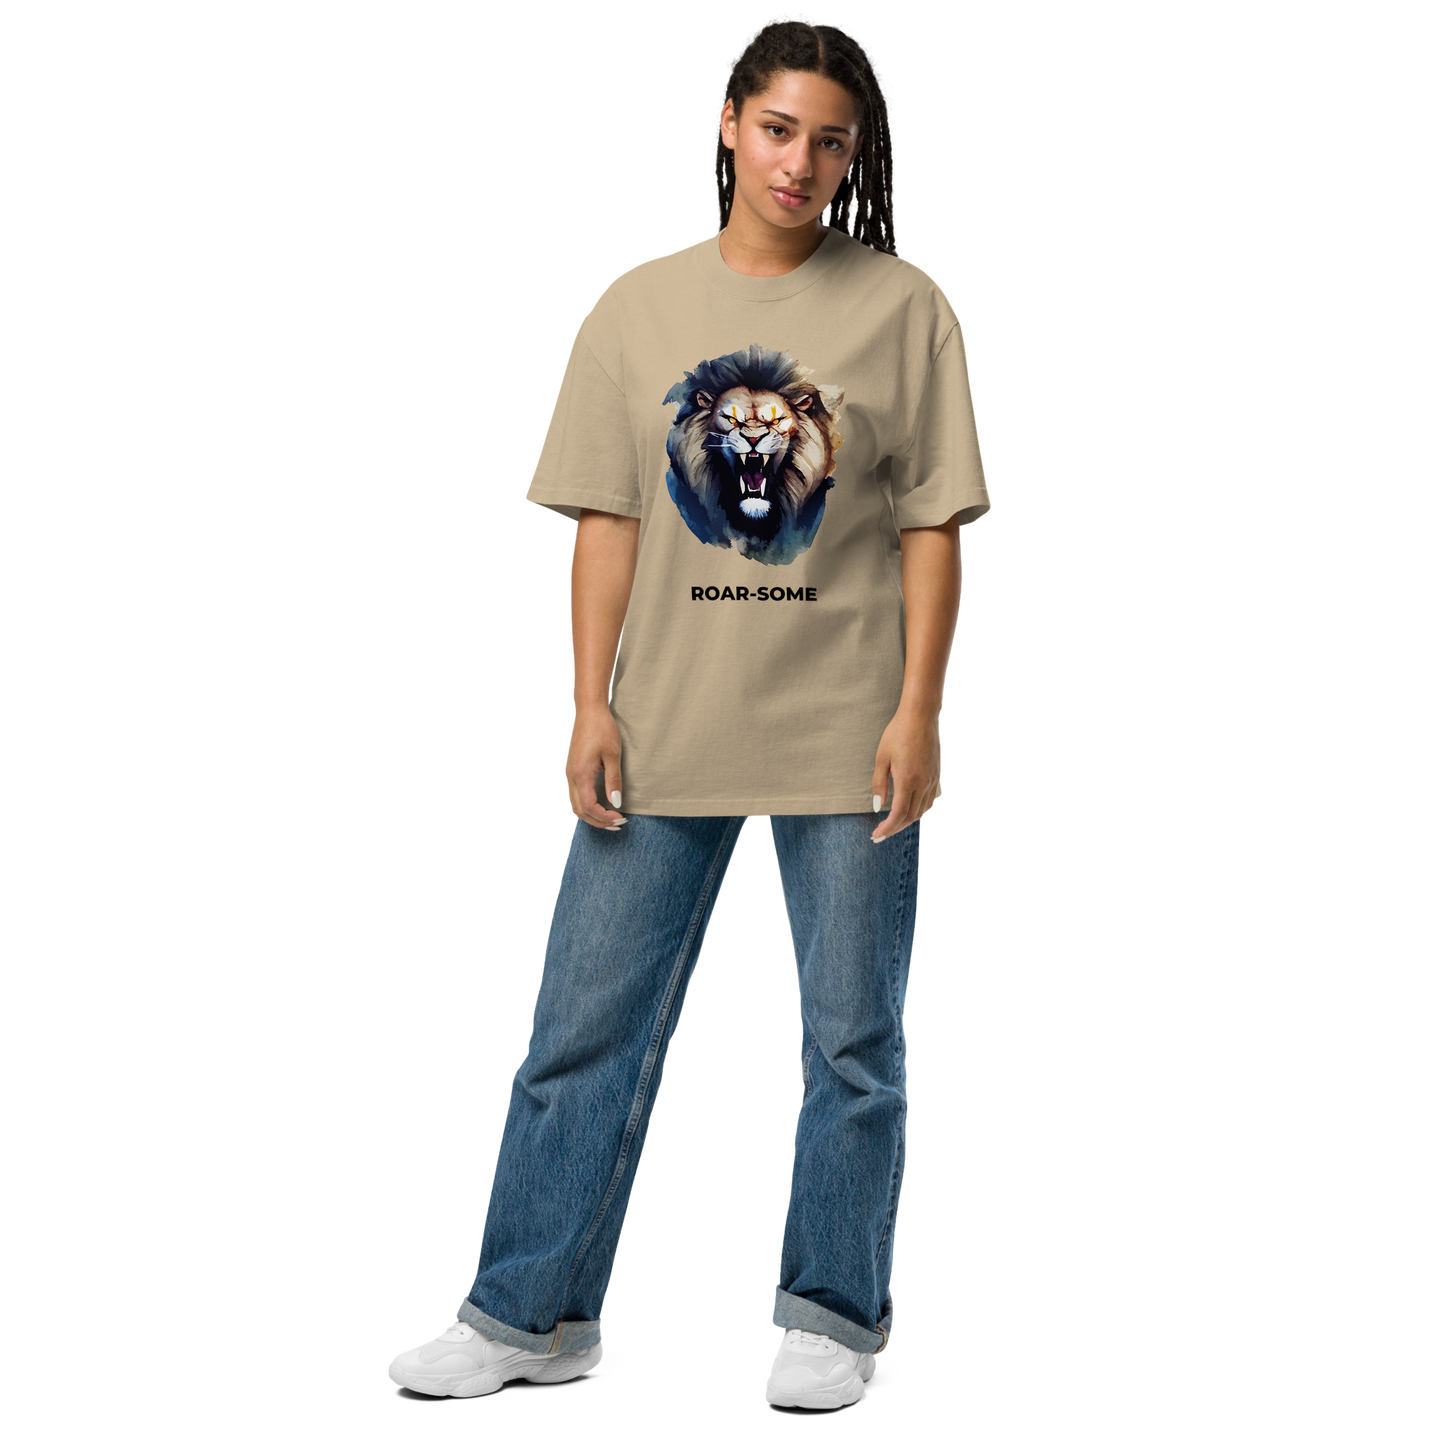 Woman wearing a Faded Khaki Lion Oversized T-Shirt featuring a Roar-Some graphic on the chest - Cool Graphic Lion Oversized Tees - Boozy Fox